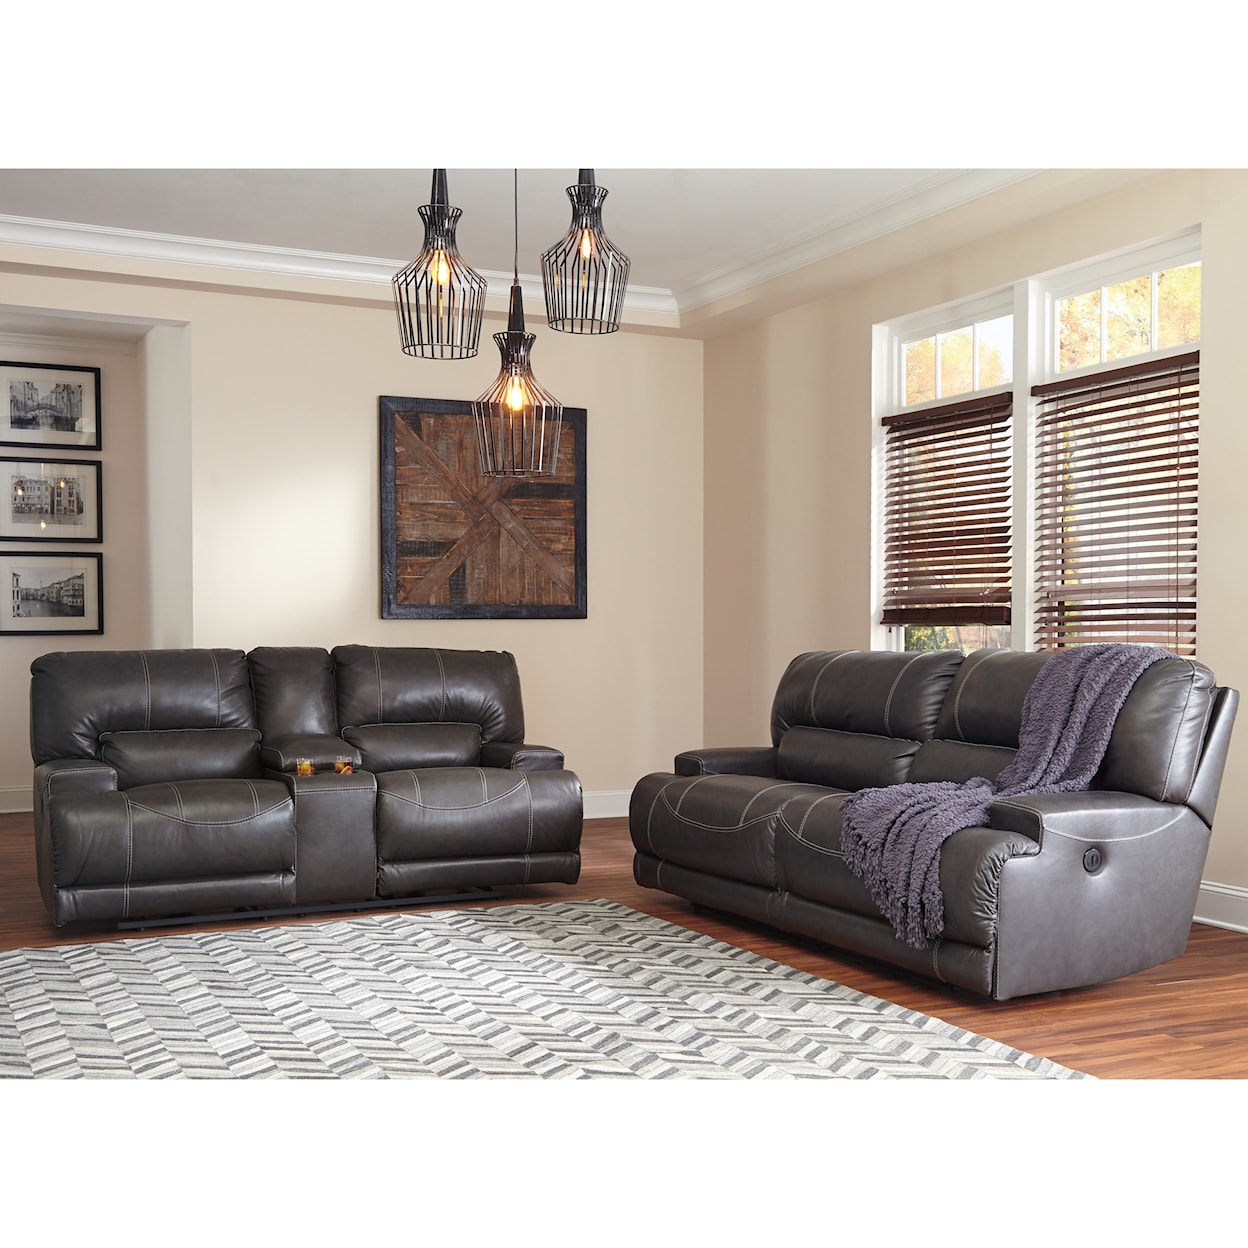 Signature Design by Ashley McCaskill Double Reclining Loveseat w/ Console